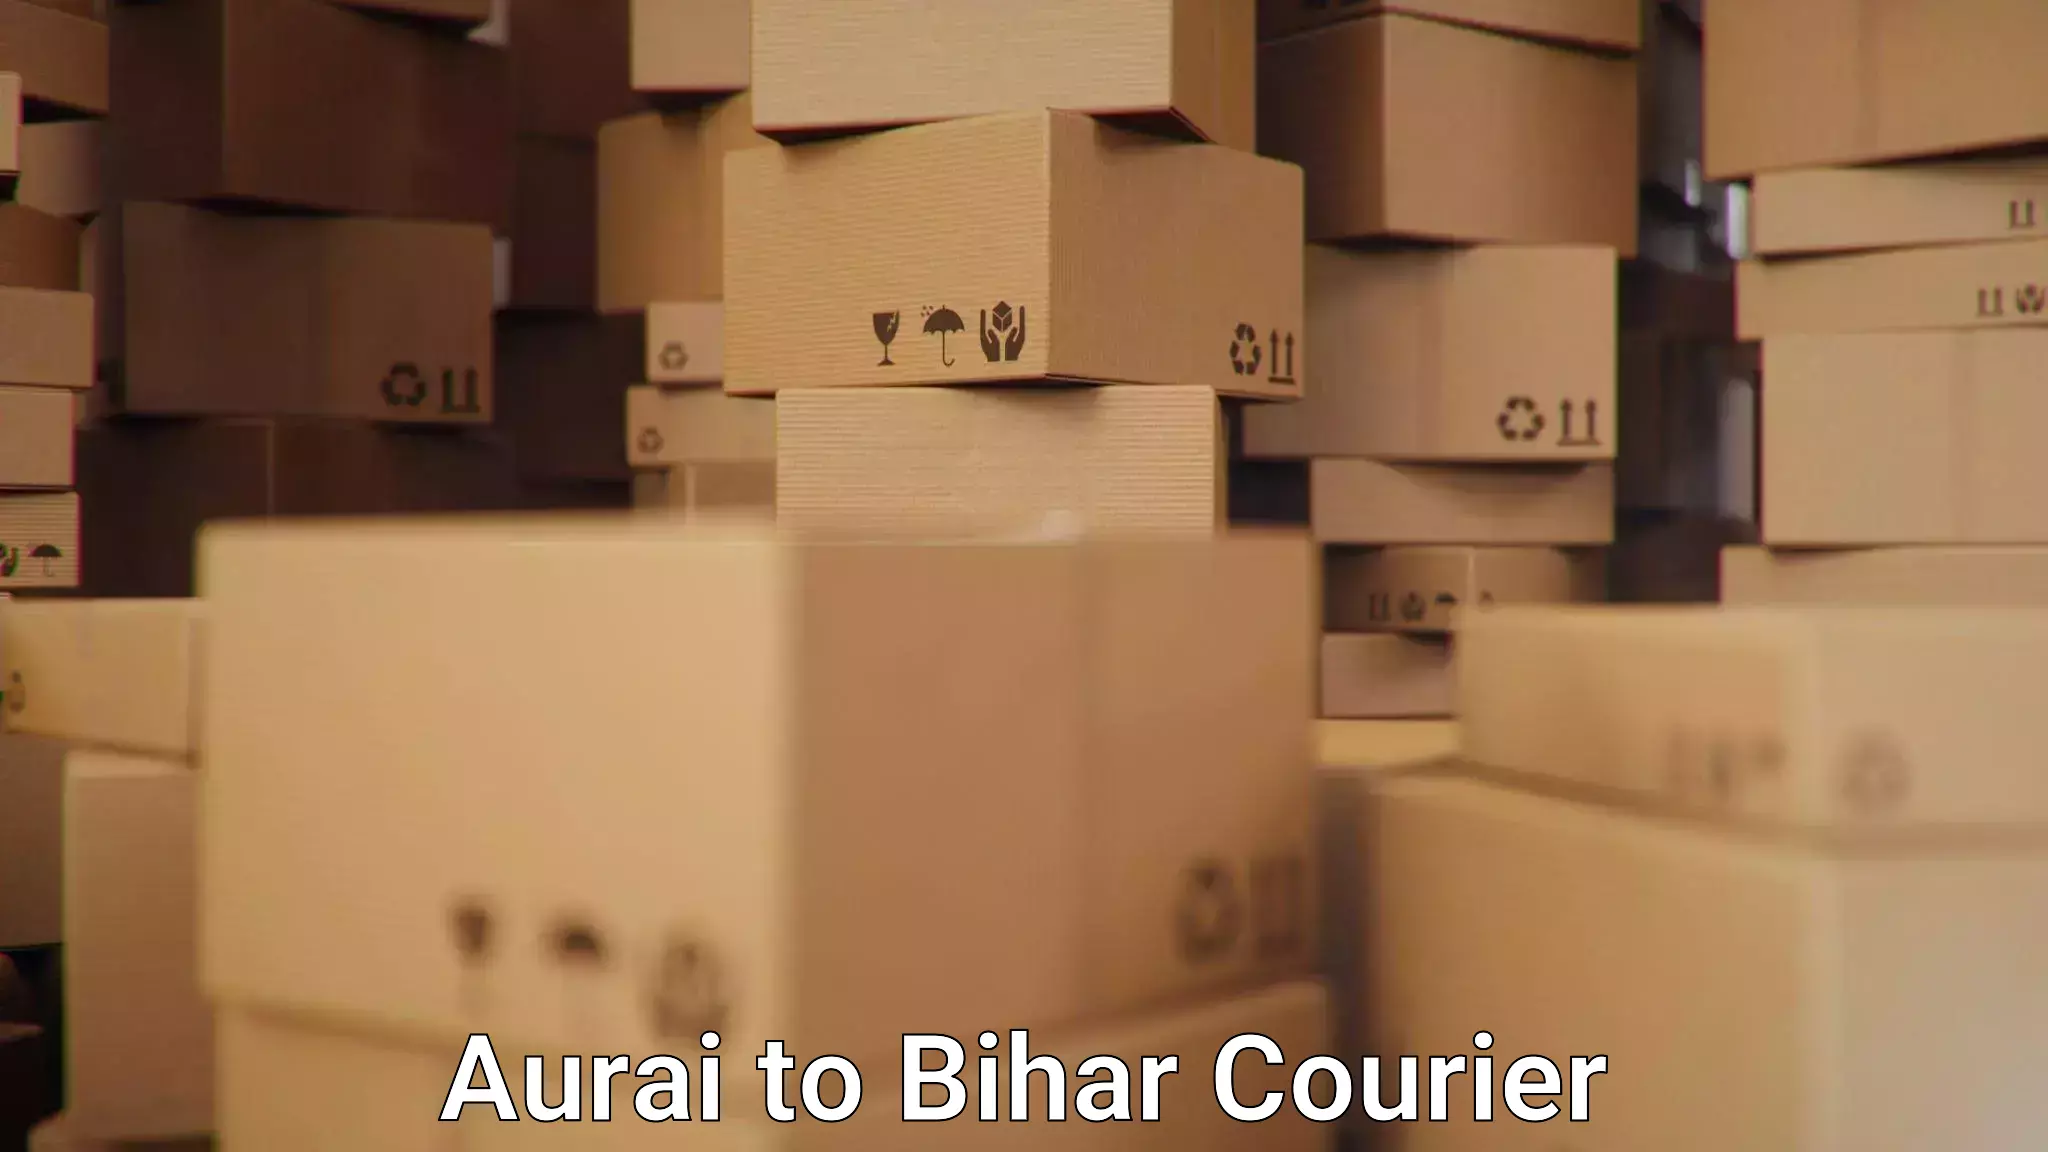 Nationwide delivery network Aurai to Bihar